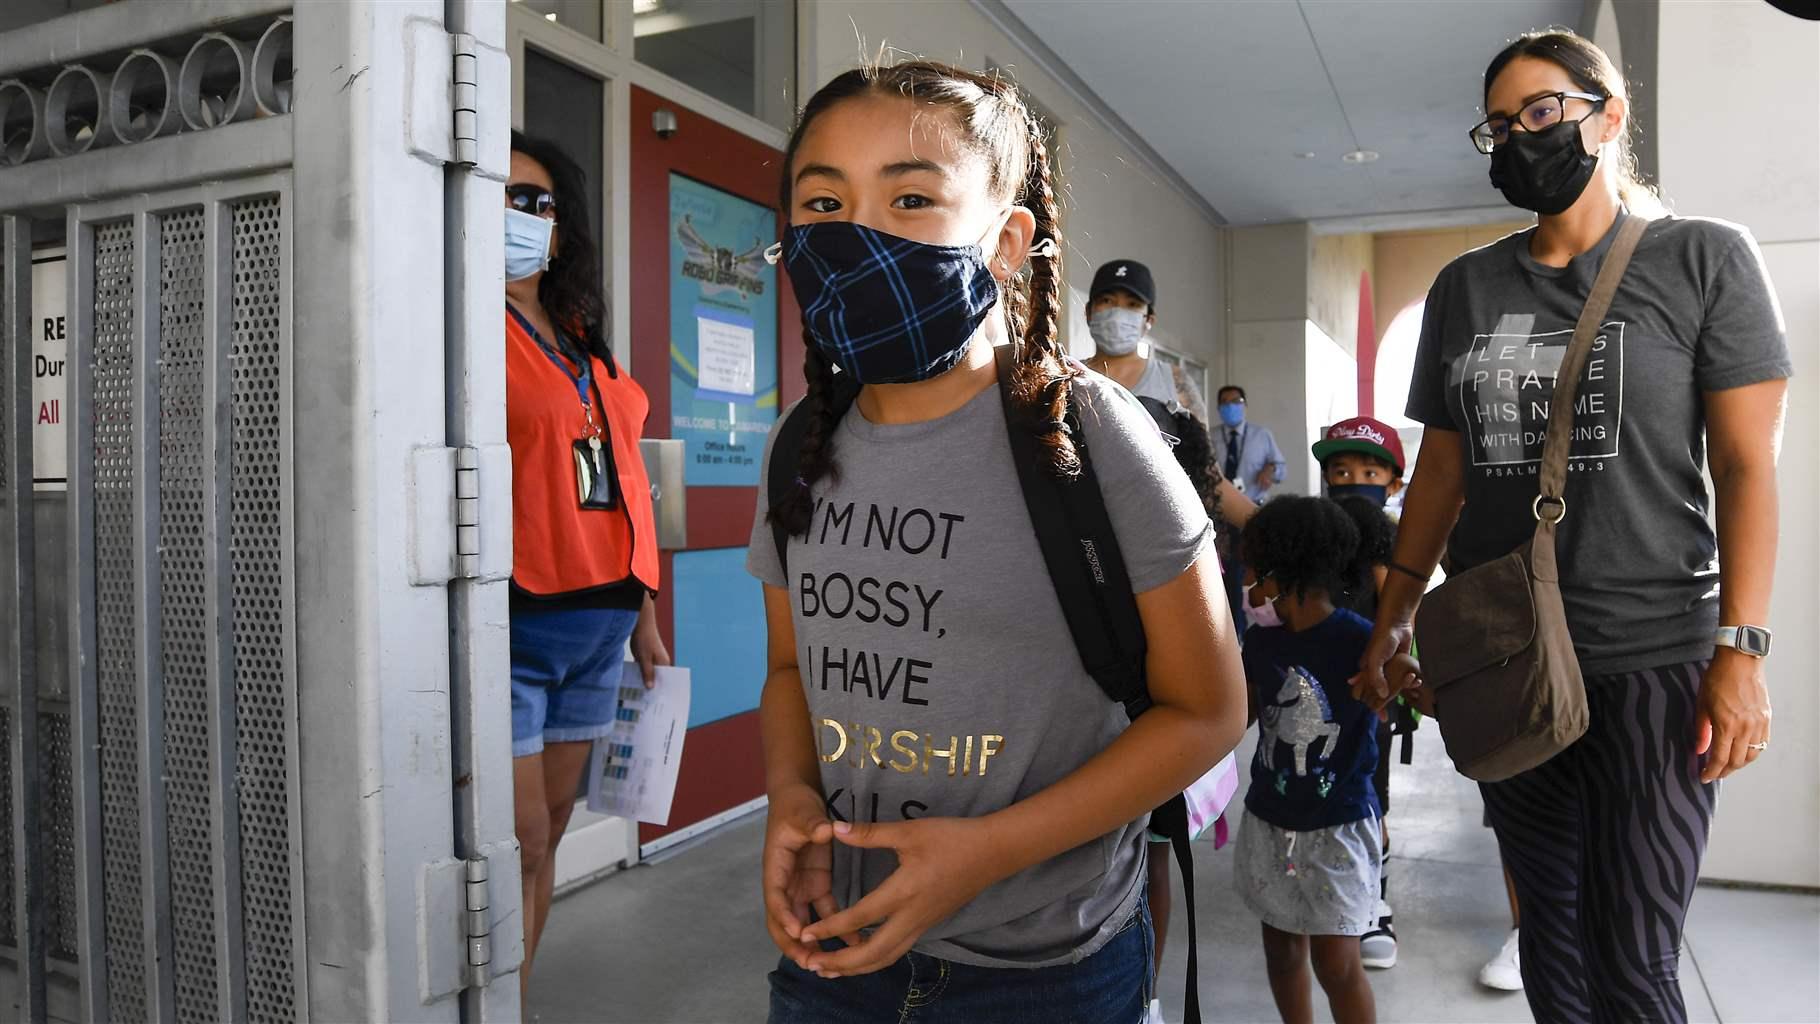 Students and parents walk into school on the first day of school at Enrique S. Camarena Elementary School Wednesday, July 21, 2021, in Chula Vista, Calif